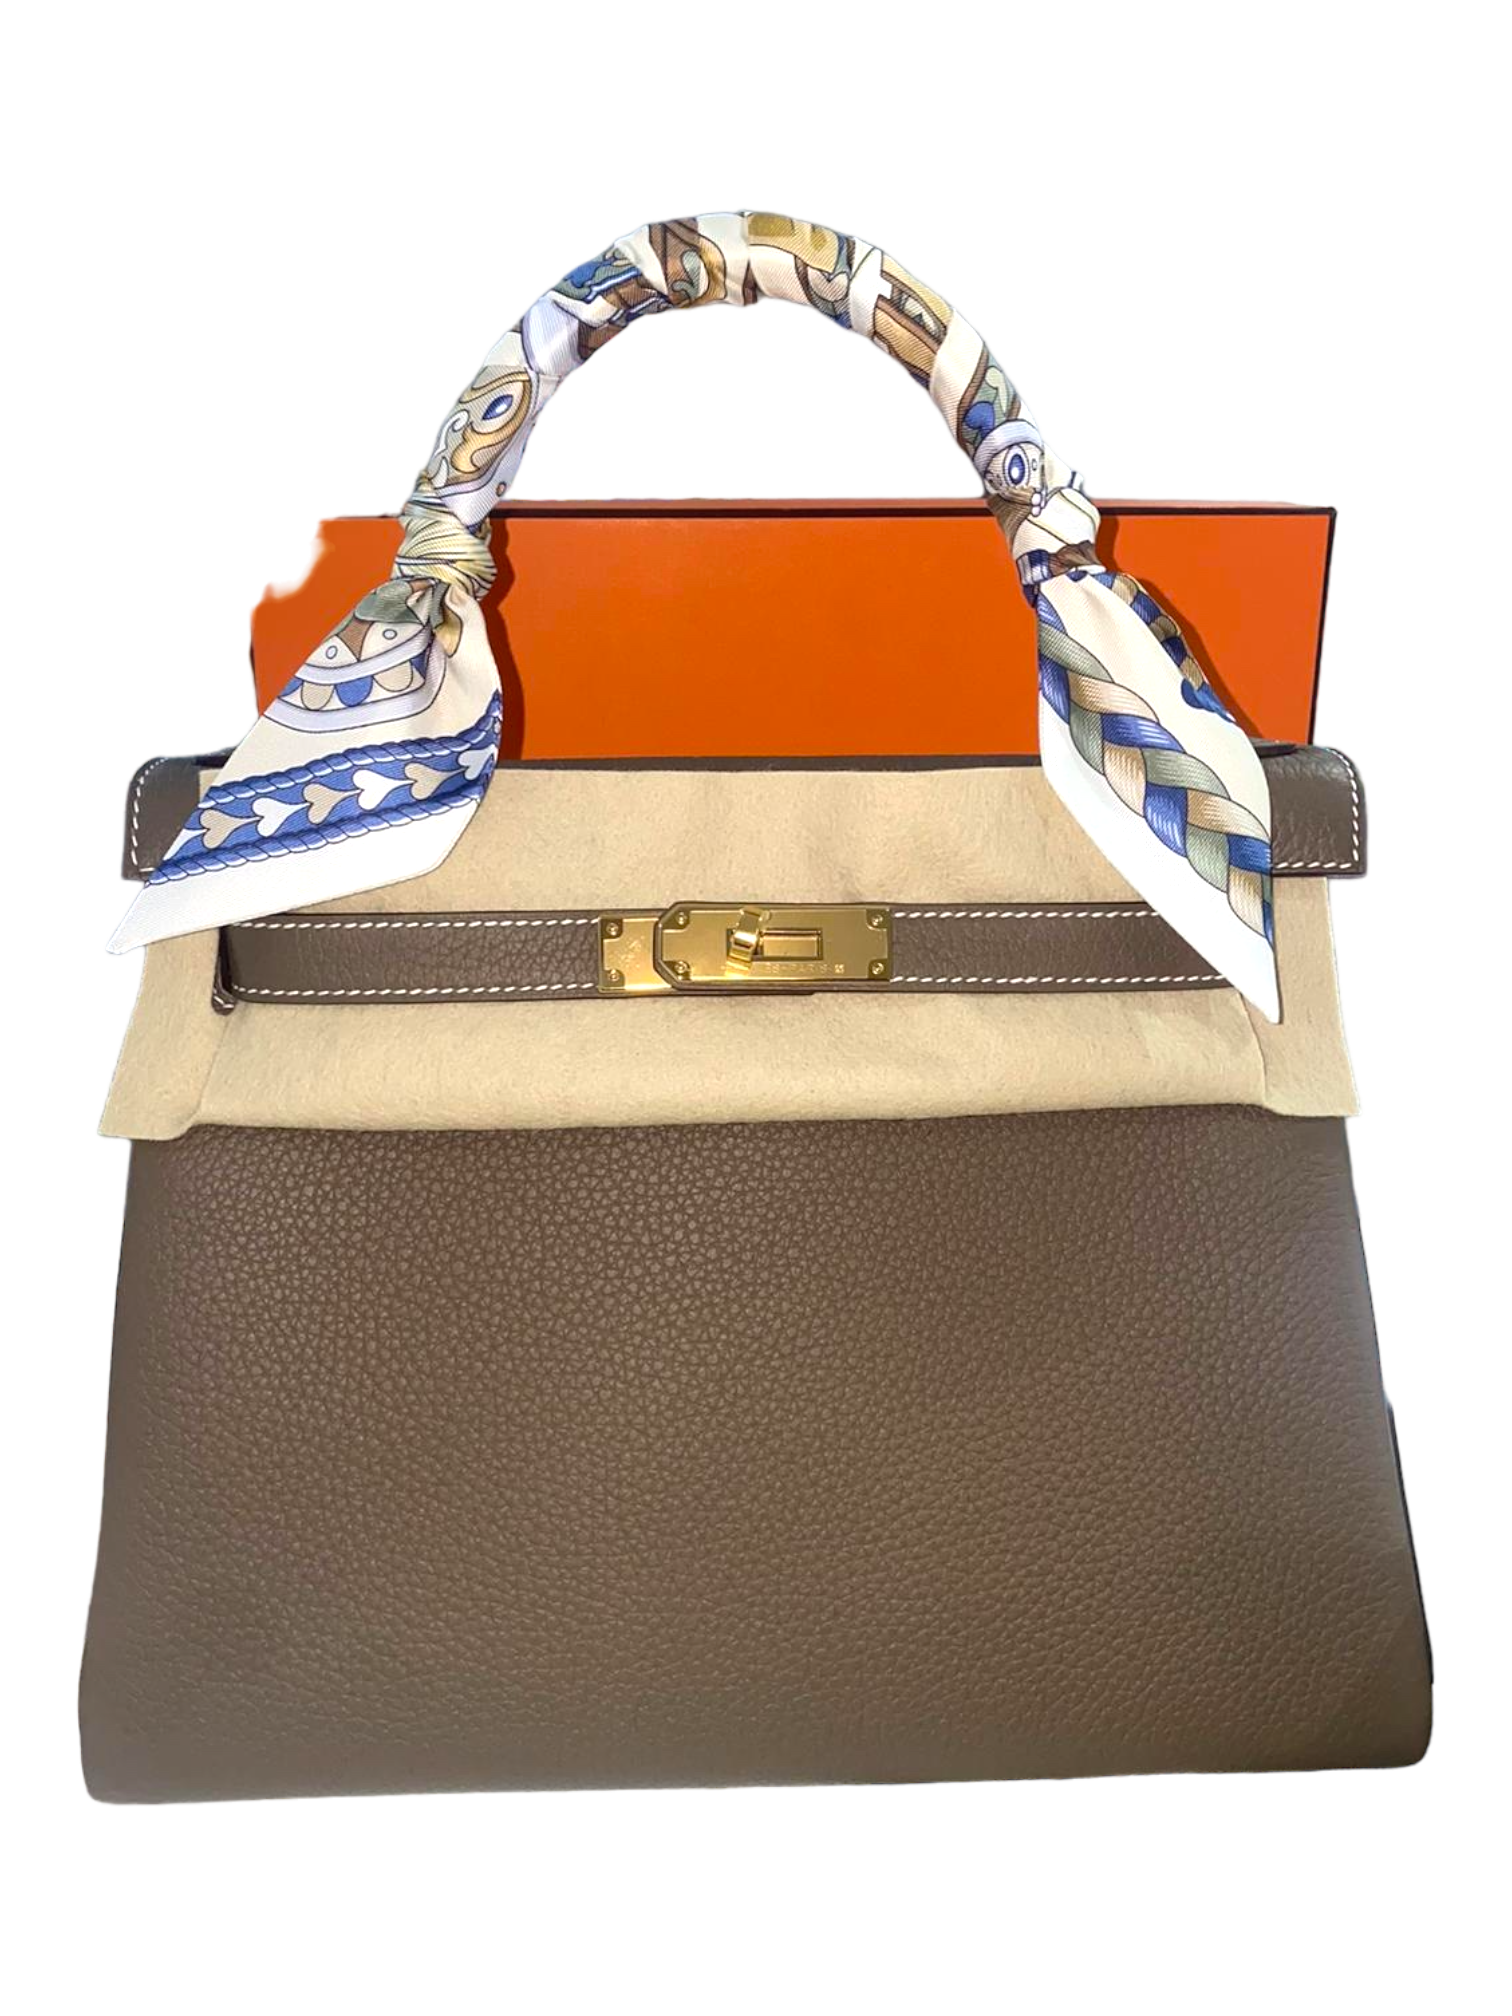 Hermes Kelly II Retourne 28 Veau Taurillon Clemence Leather